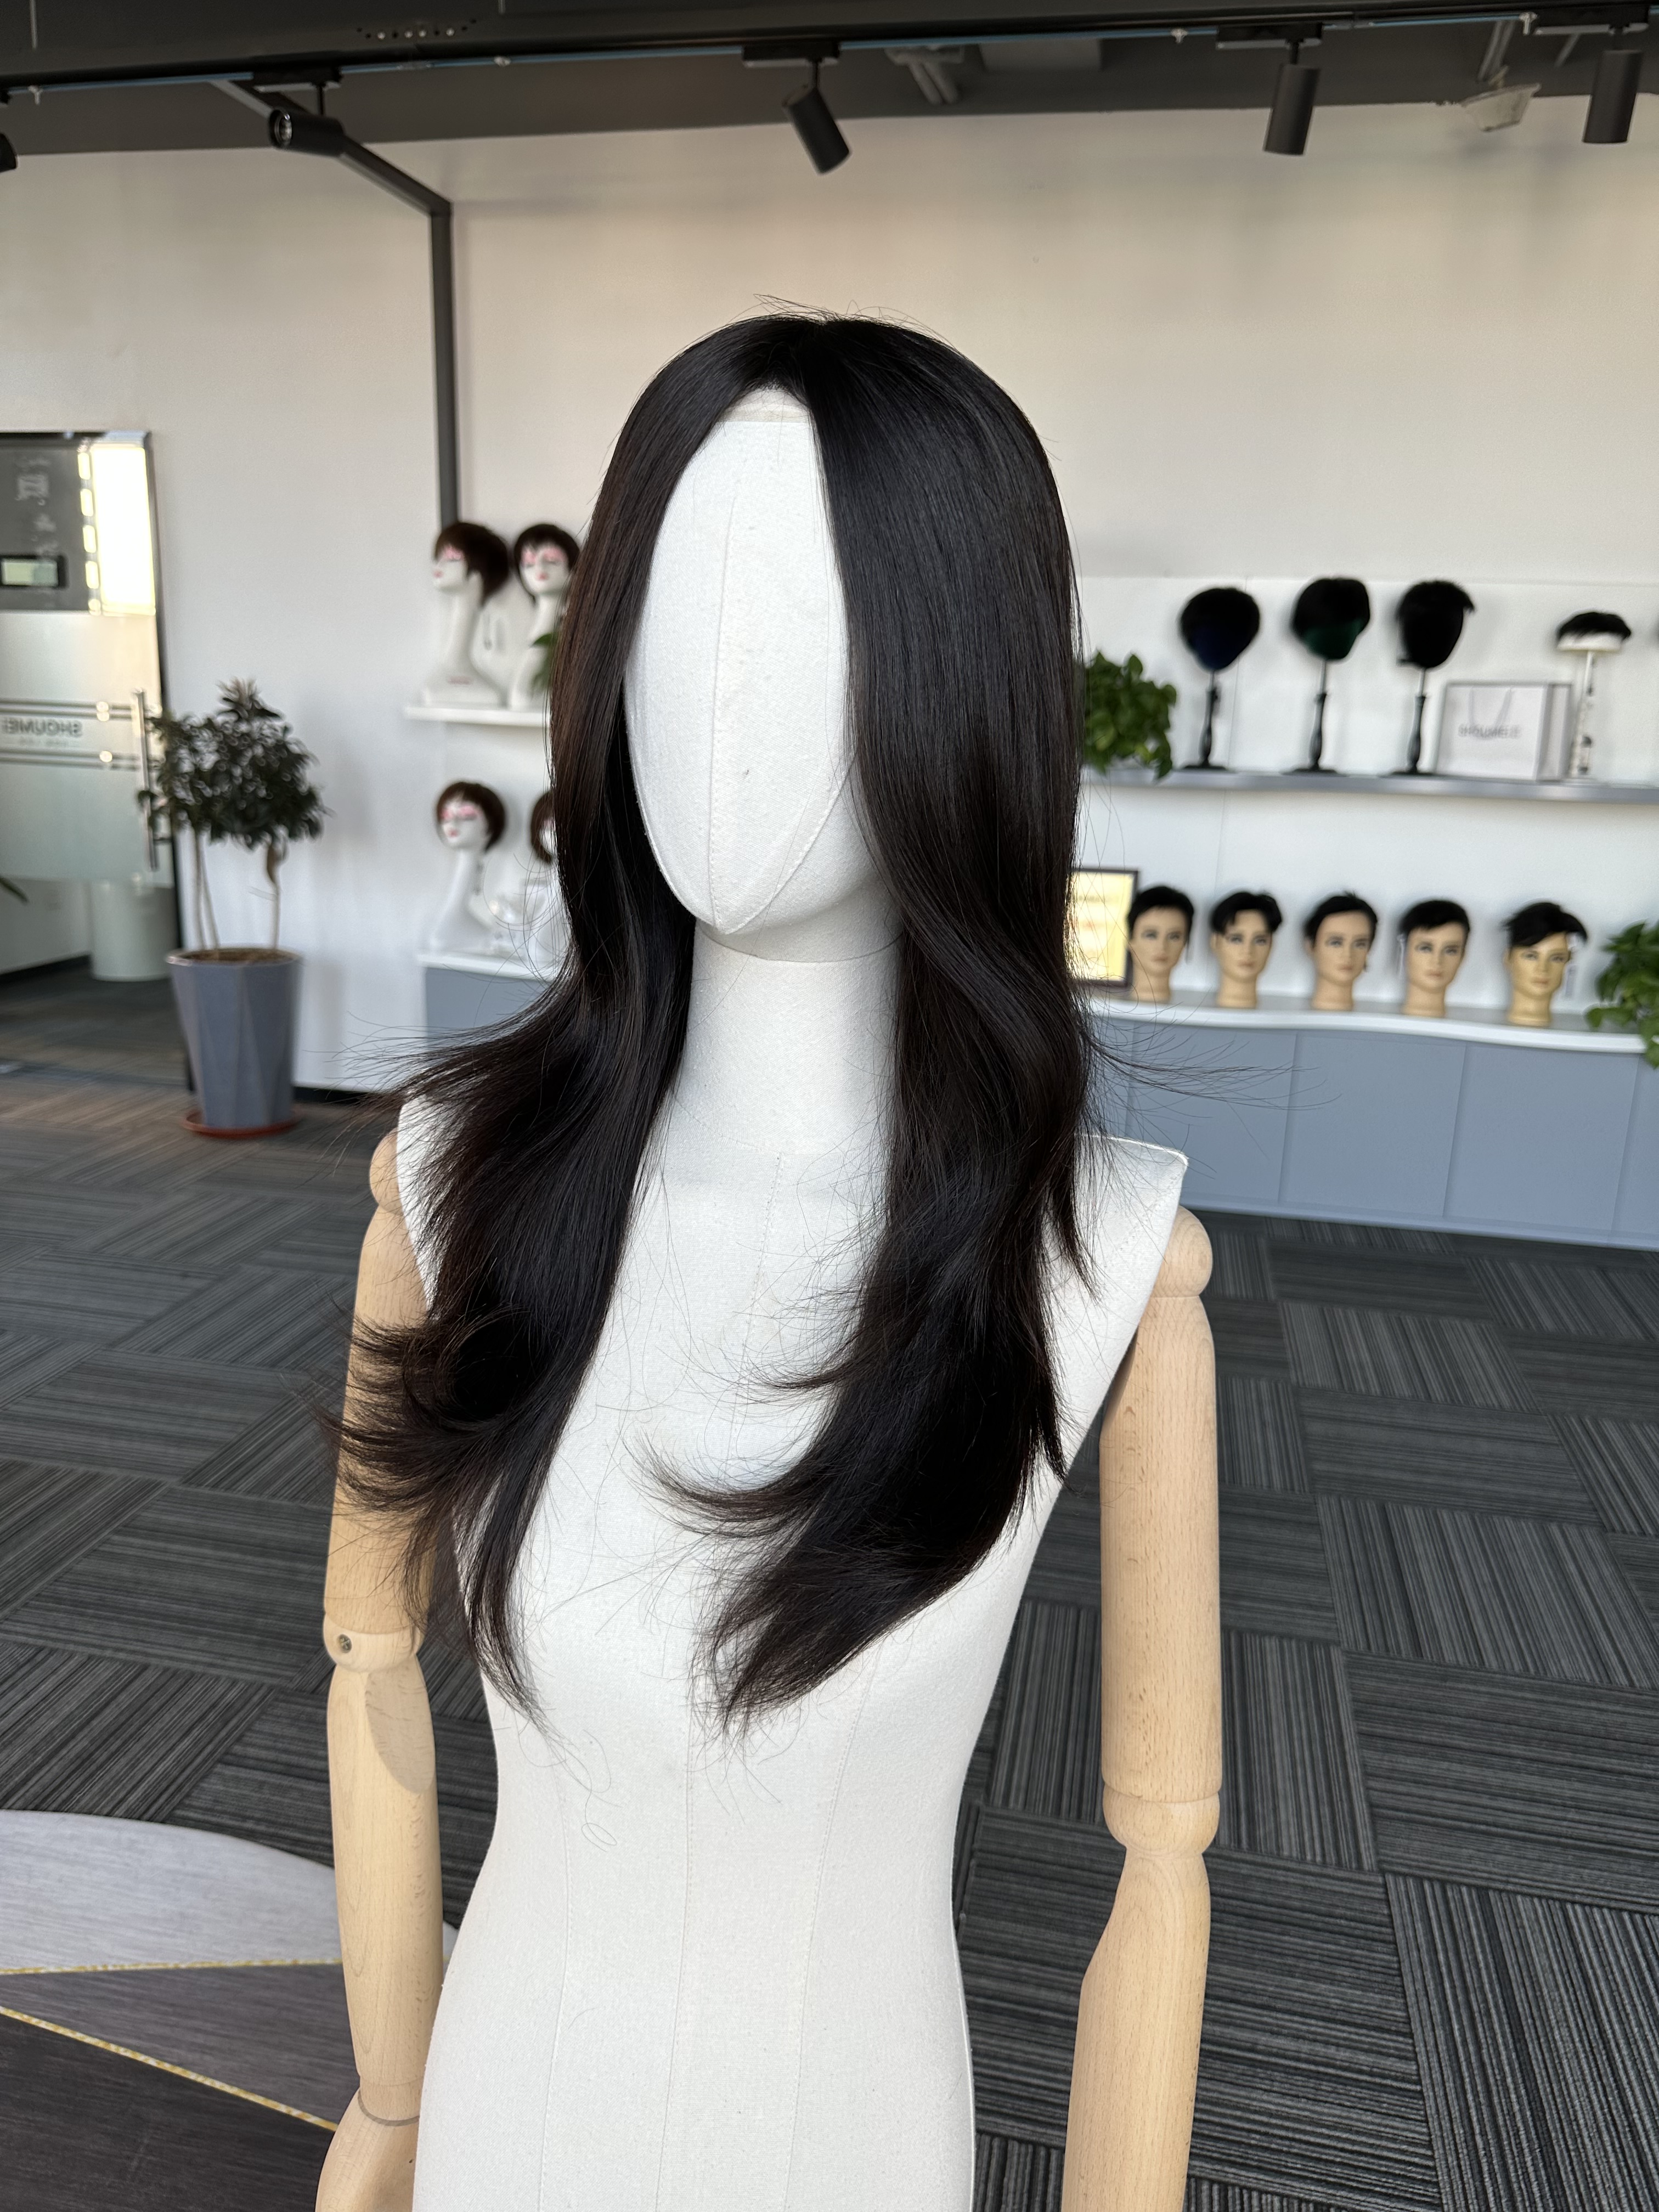 130% Natural Poly Skin Medical Wigs For Cancer Patients Women's Virgin Human Hair Lace Front Medical Wig For Alopecia And Chemo Hair Loss Wholesale